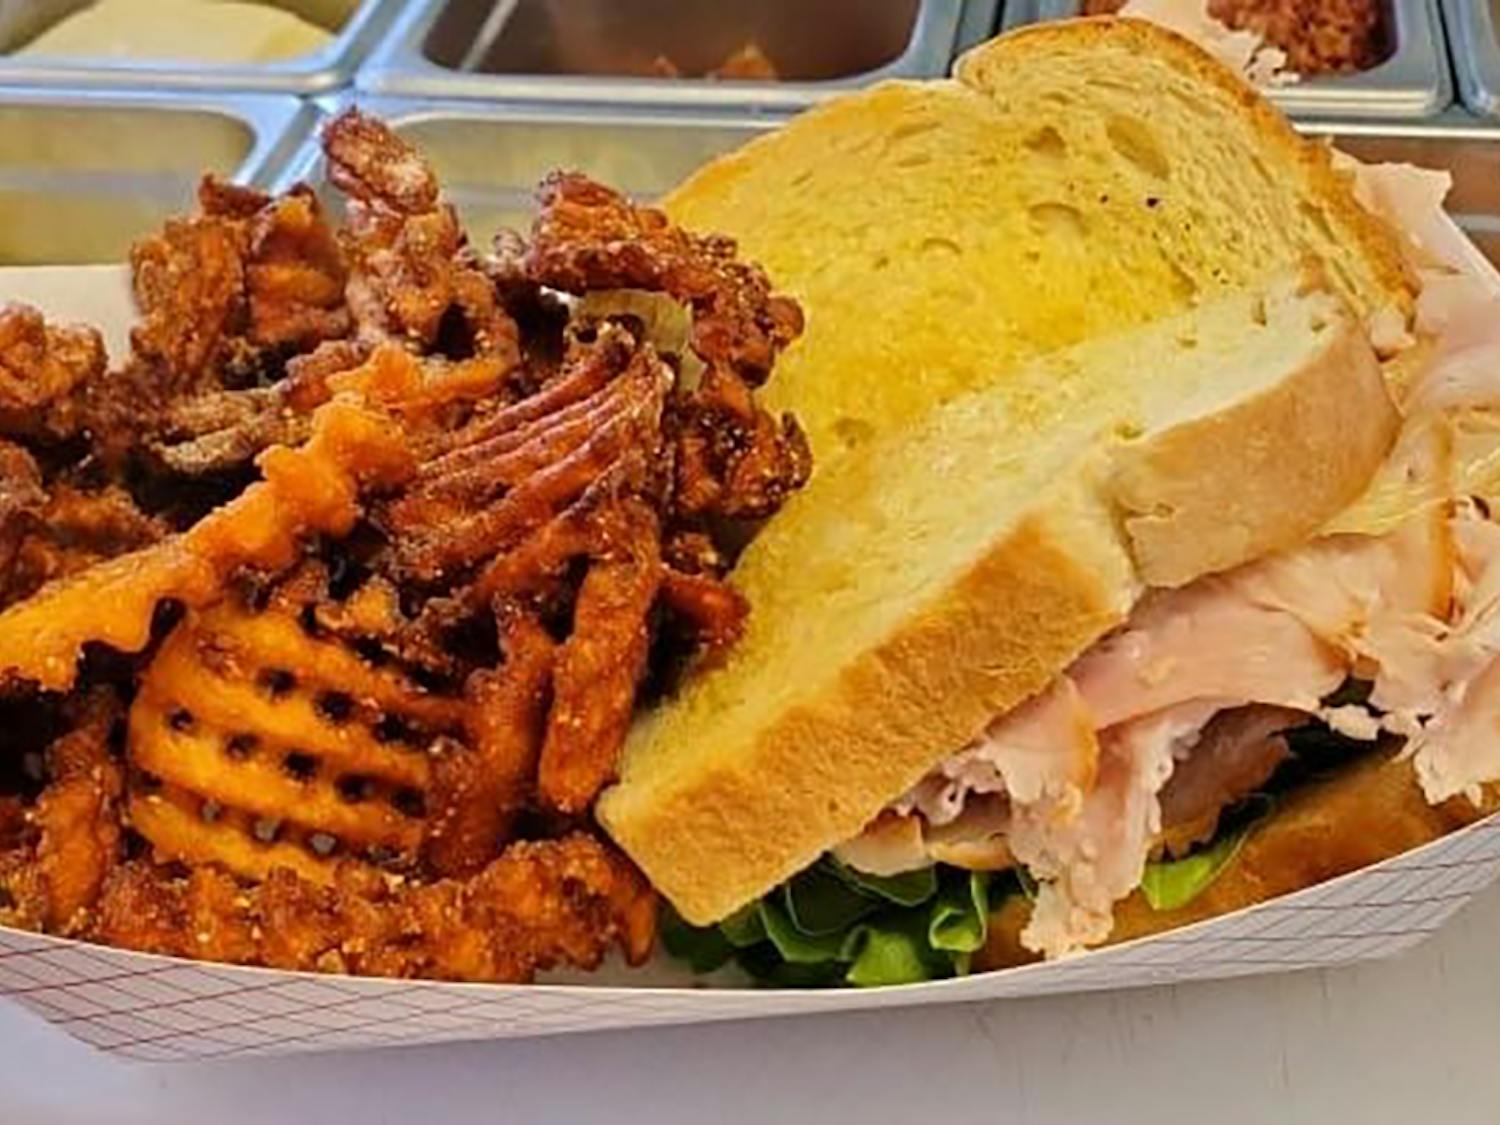 A sandwich from the Hippie Chicks food truck. Hippie Chicks' grilled sandwiches have meat, cheese, lettuce, tomato and onions on sourdough bread with a side of sweet potato fries.&nbsp;